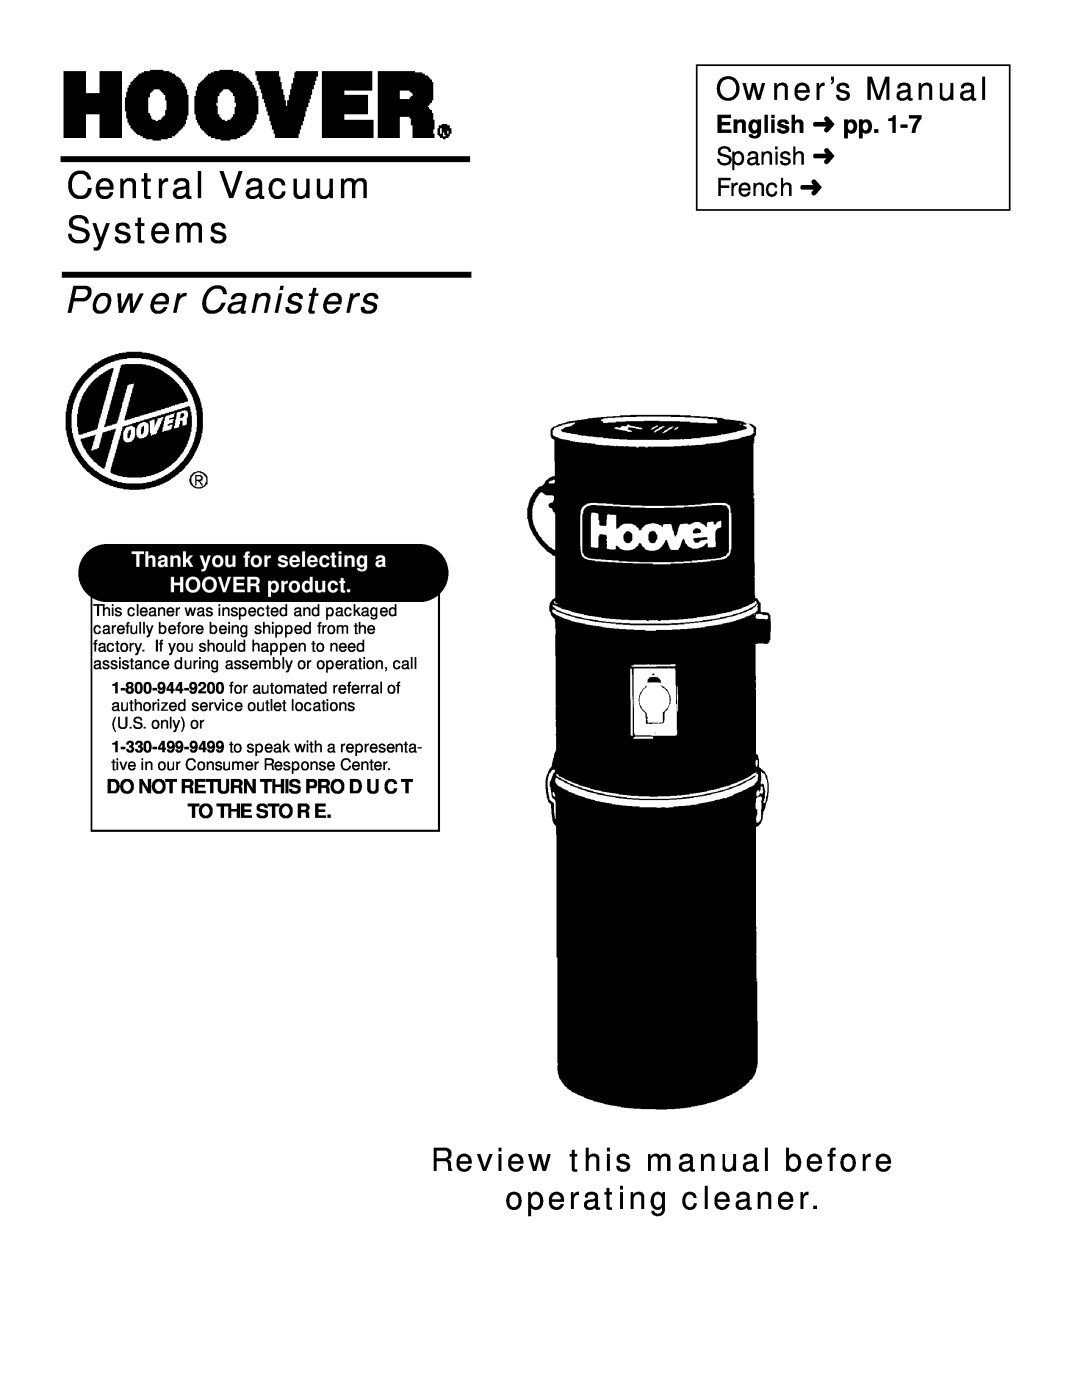 Hoover Central Vacuum Systems owner manual Owner’s Manual, Review this manual before operating cleaner, Power Canisters 